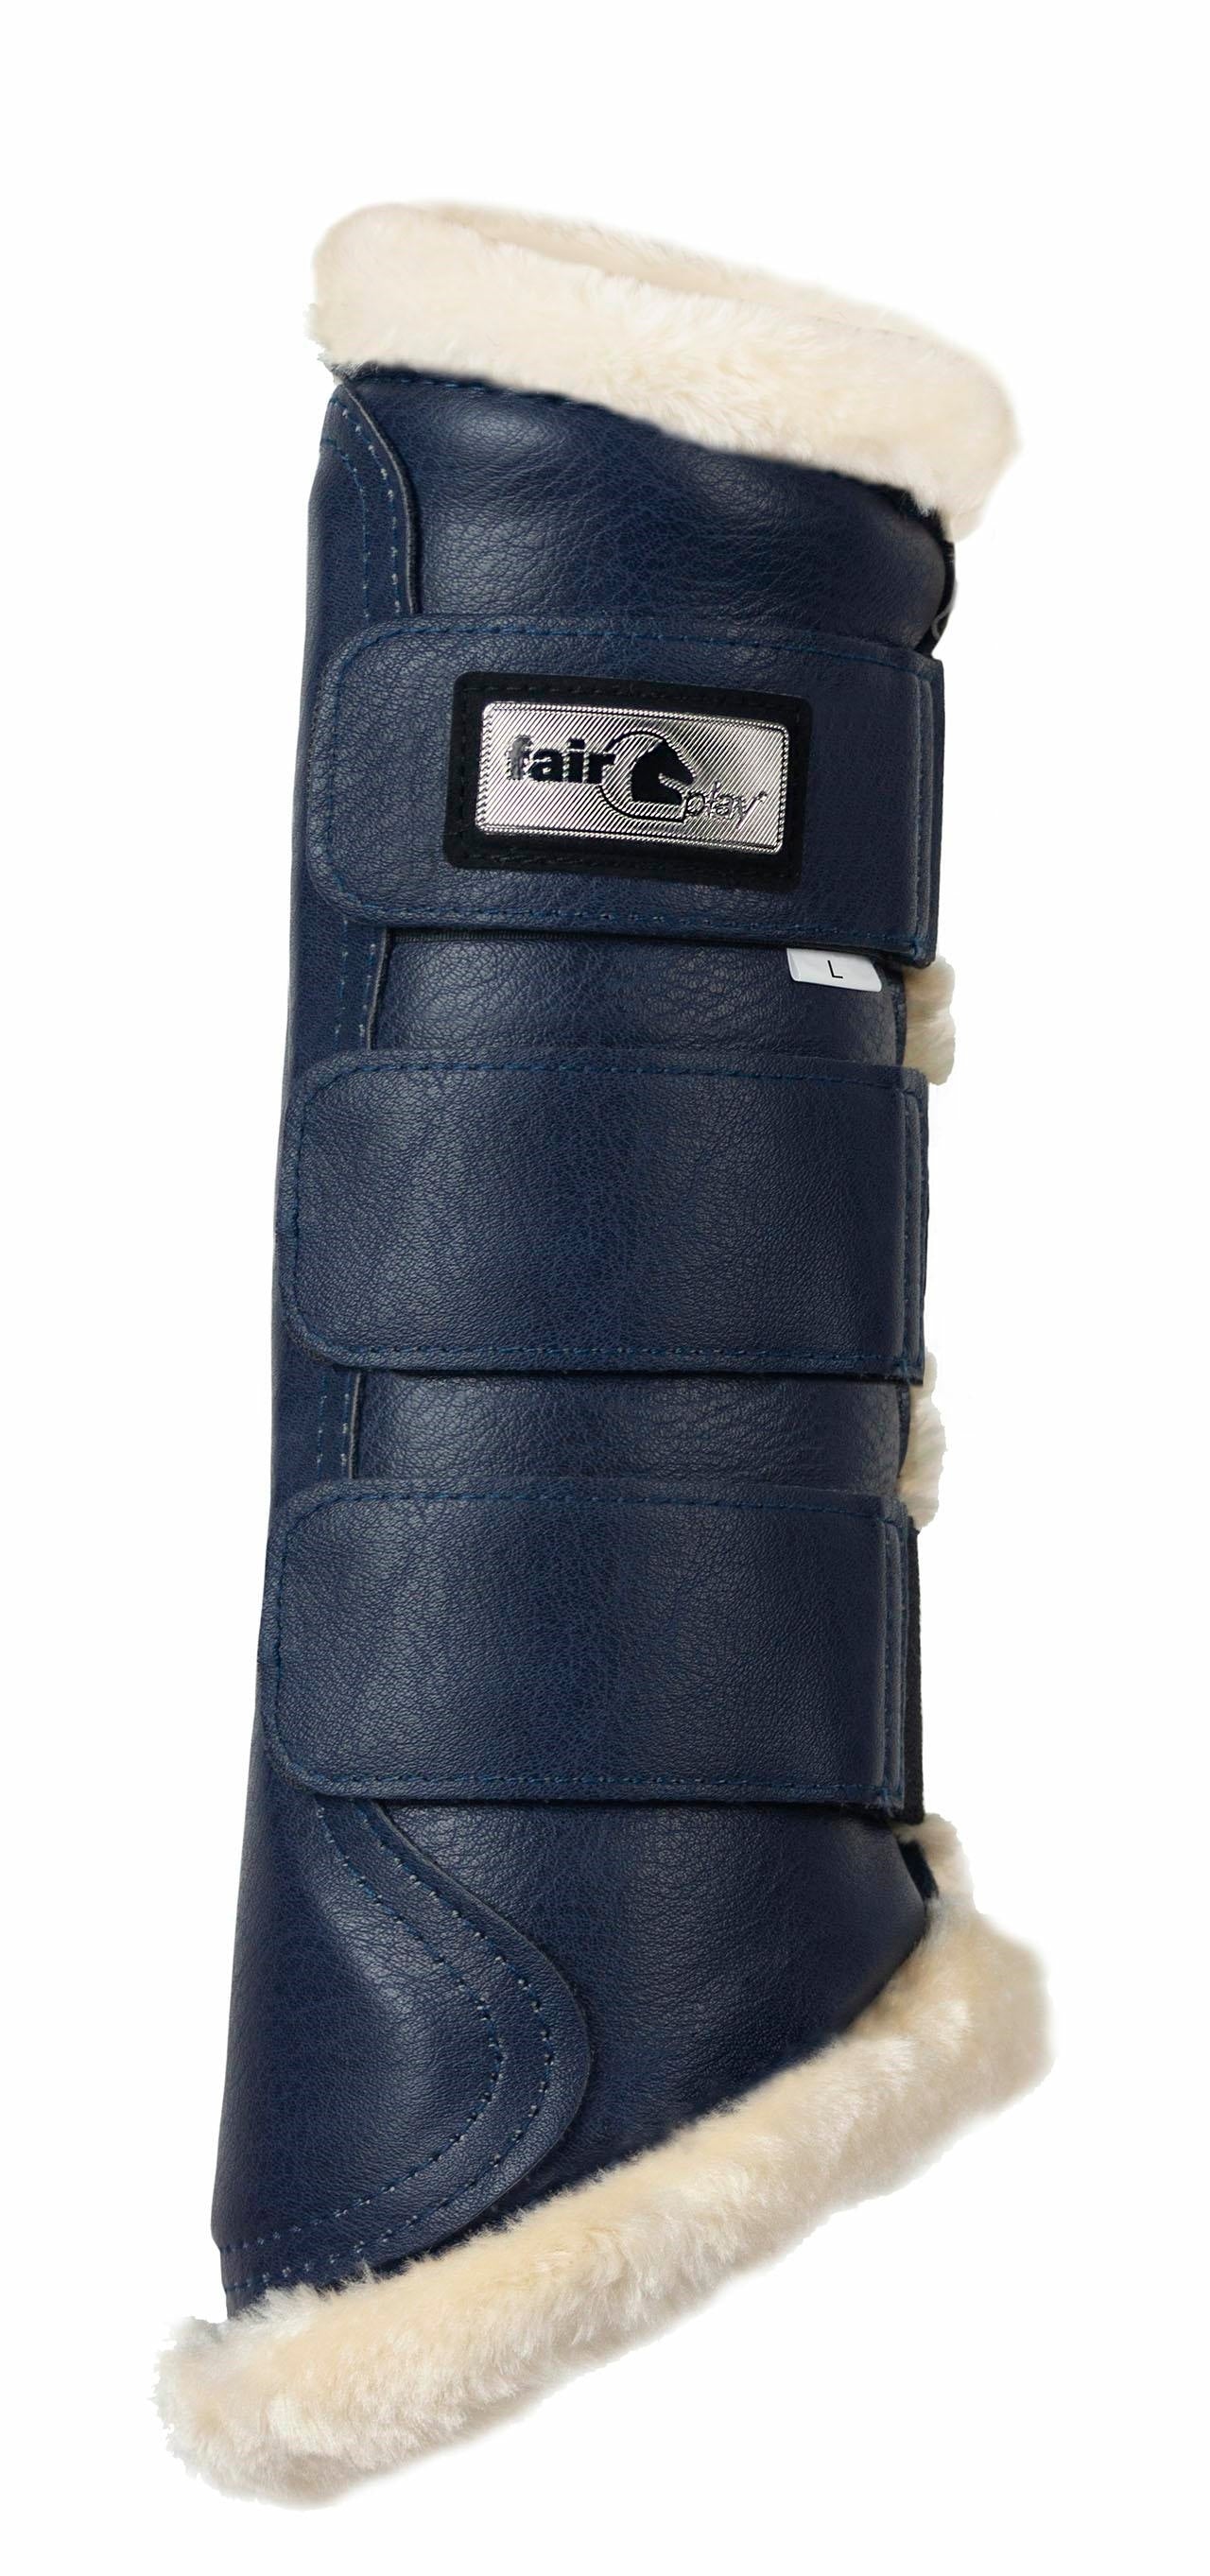 Fairplay Cadence Dressage Protection Boots